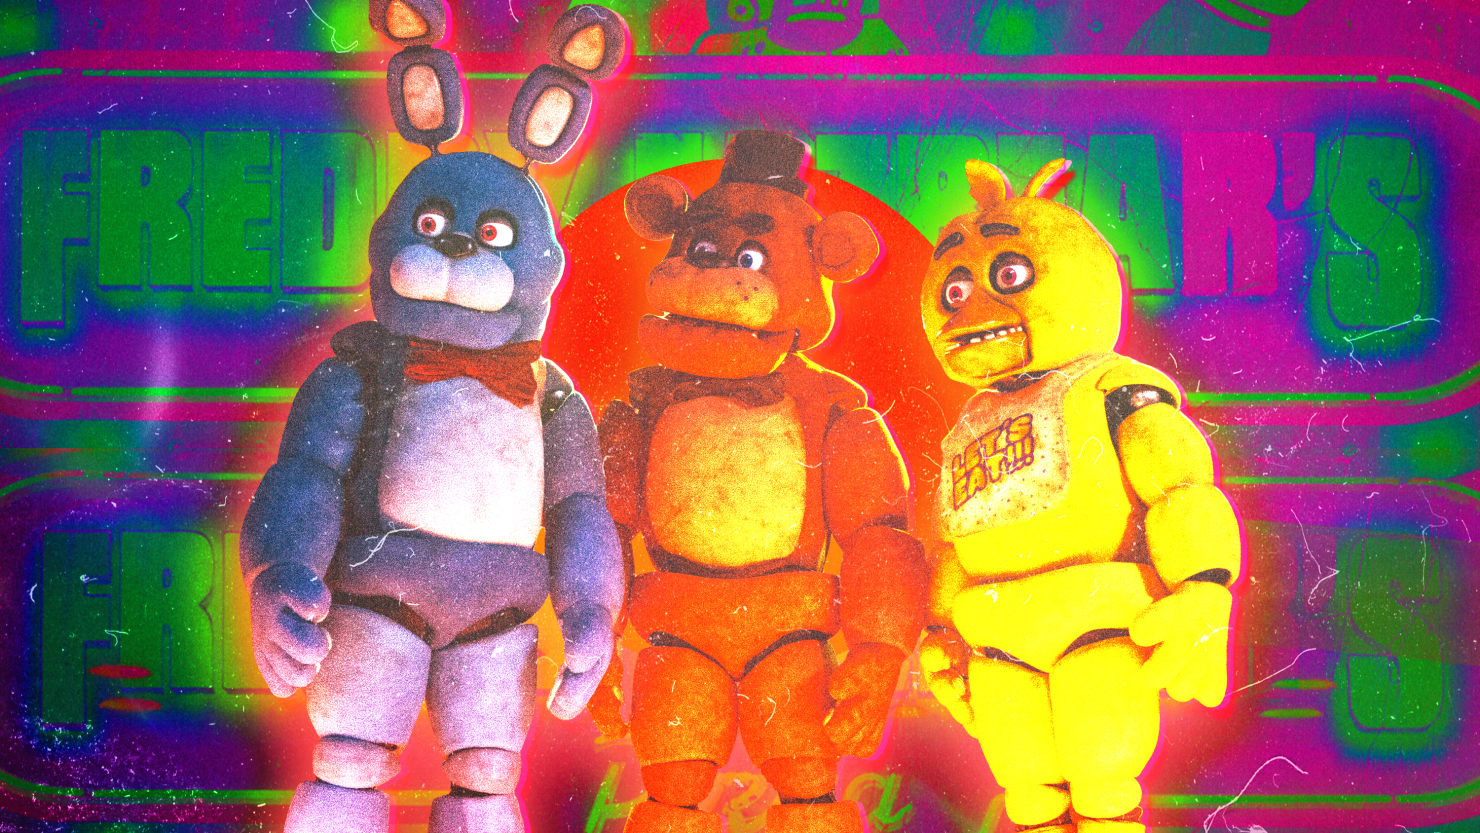 Everything You Need To Know About The 'Five Nights At Freddy's